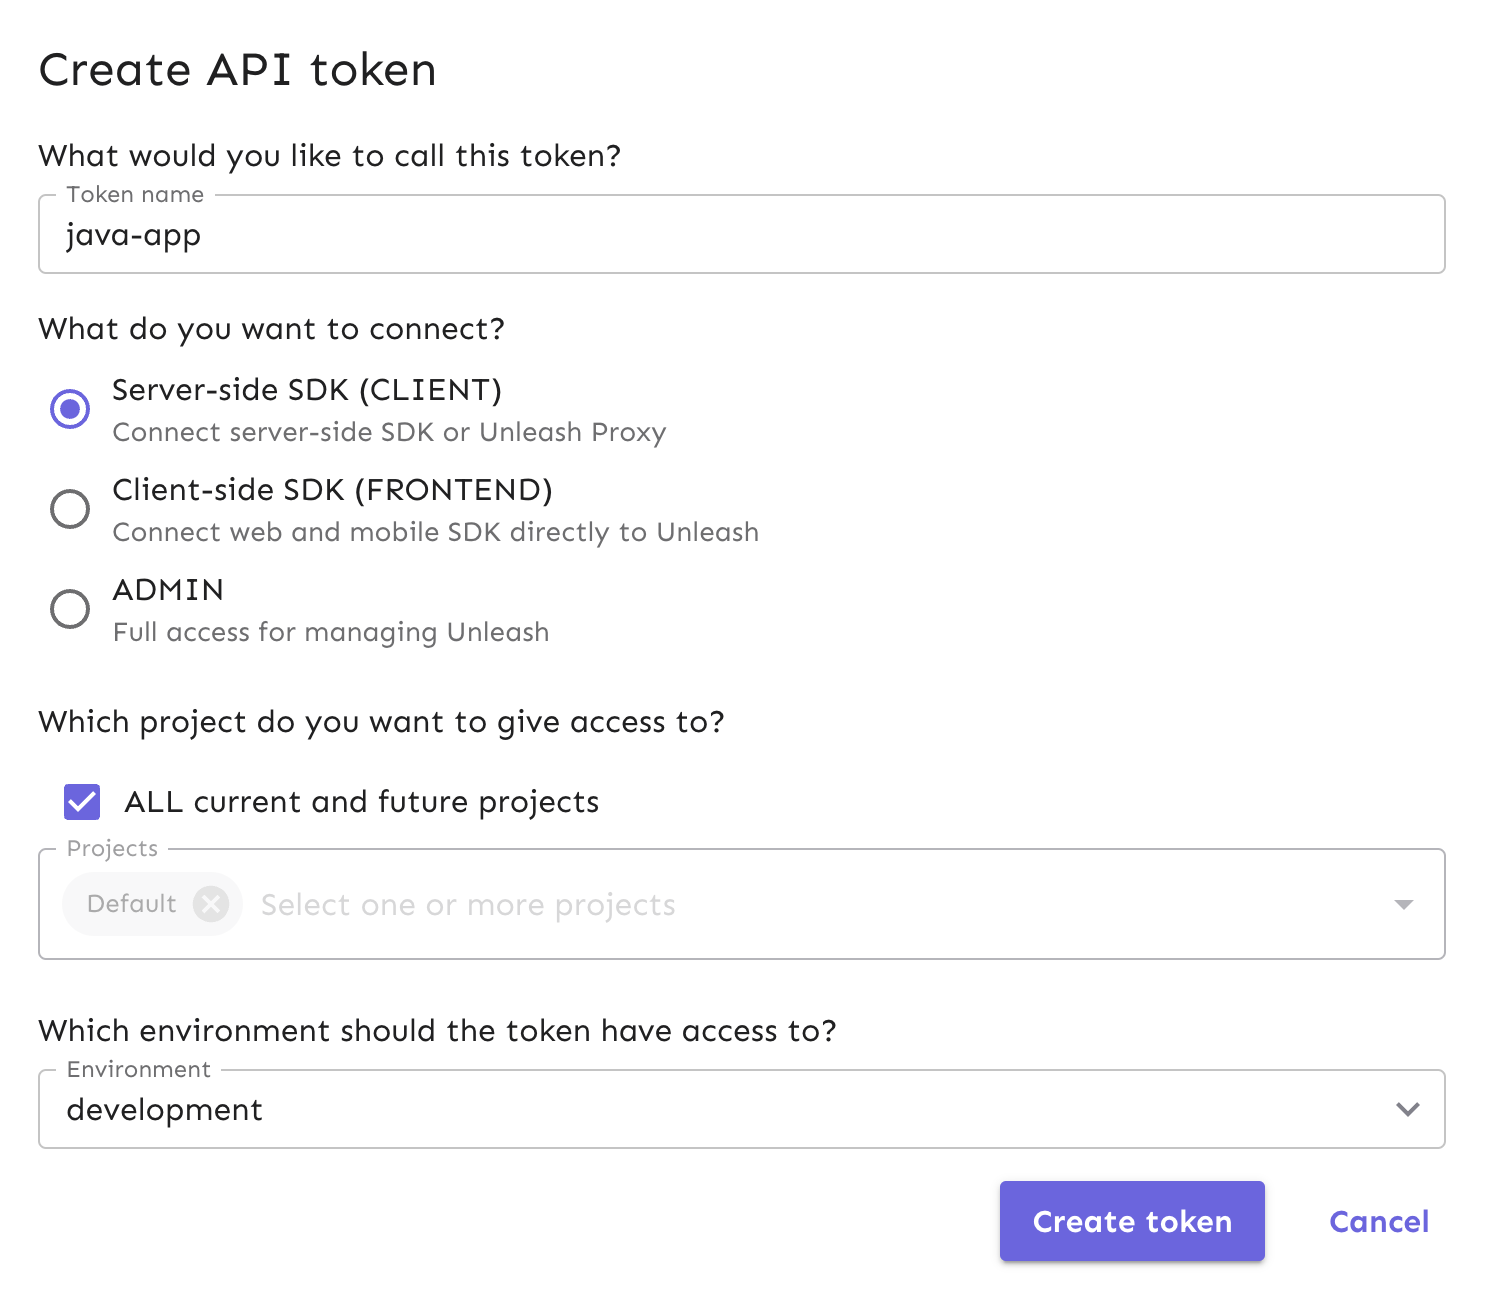 Name your API token and make sure it is a server-side SDK token.